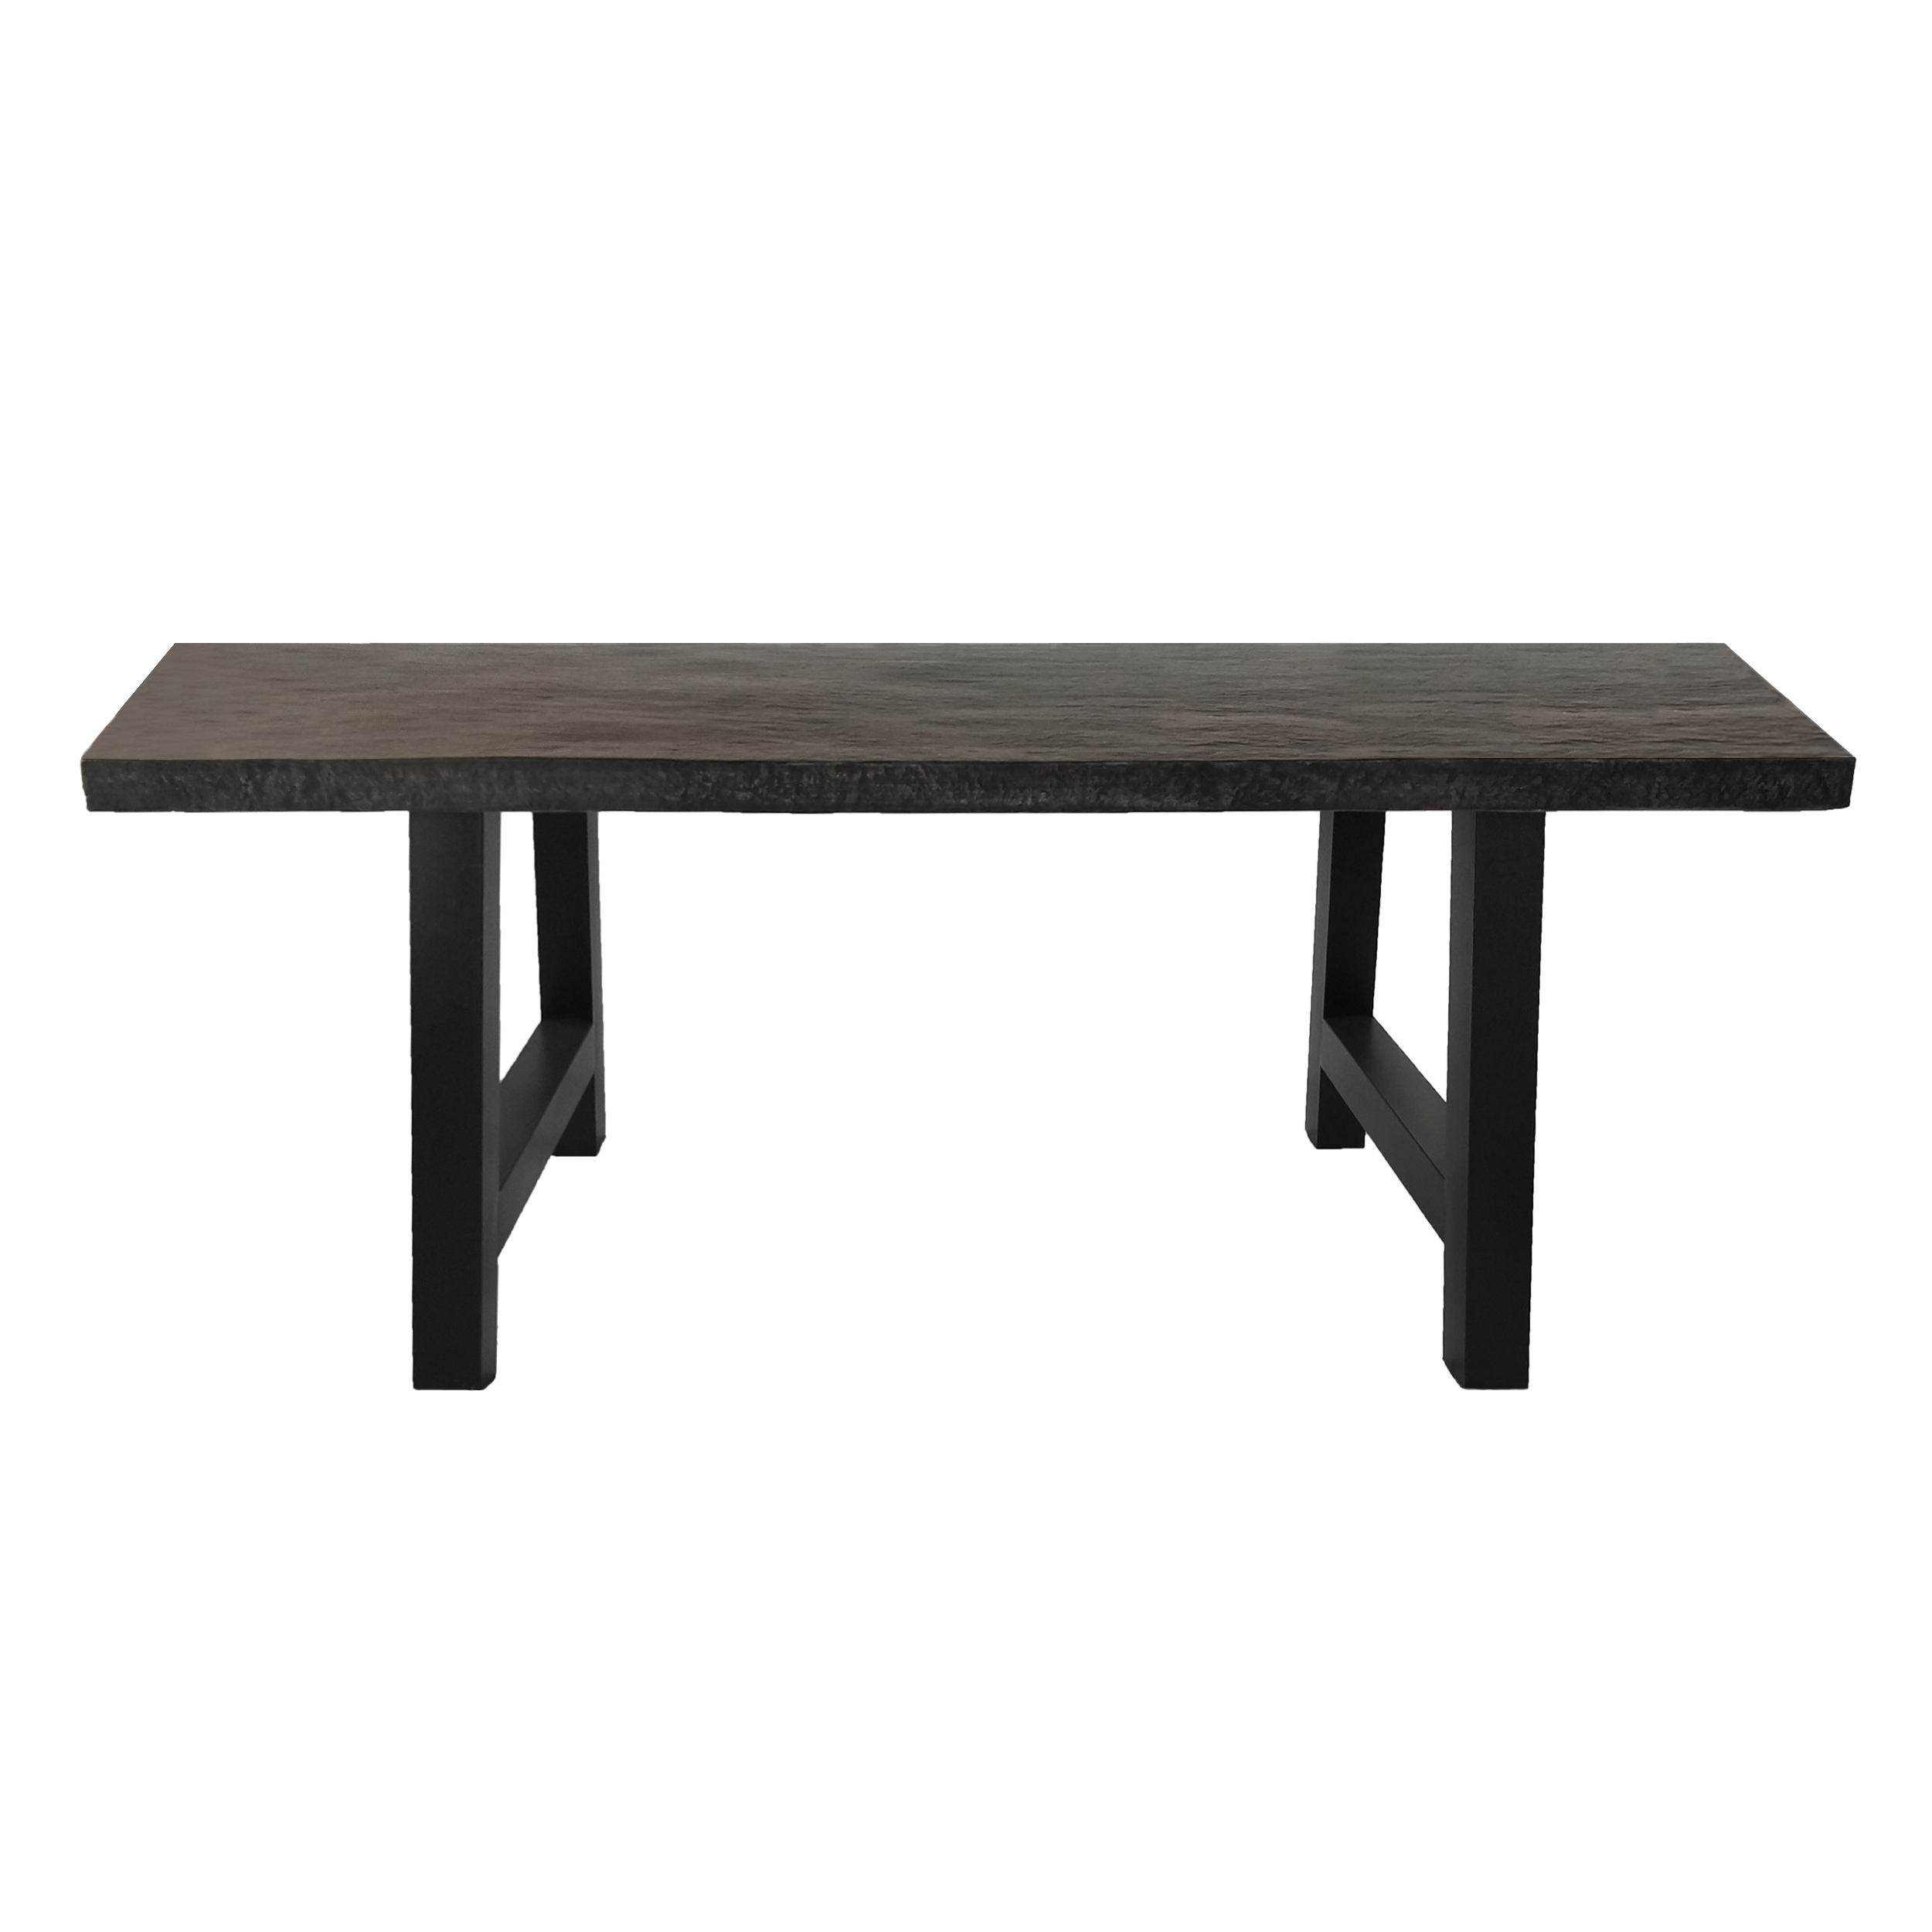 Gianni Outdoor Light Weight Concrete Dining Table, Stone Grey, Black - image 4 of 7